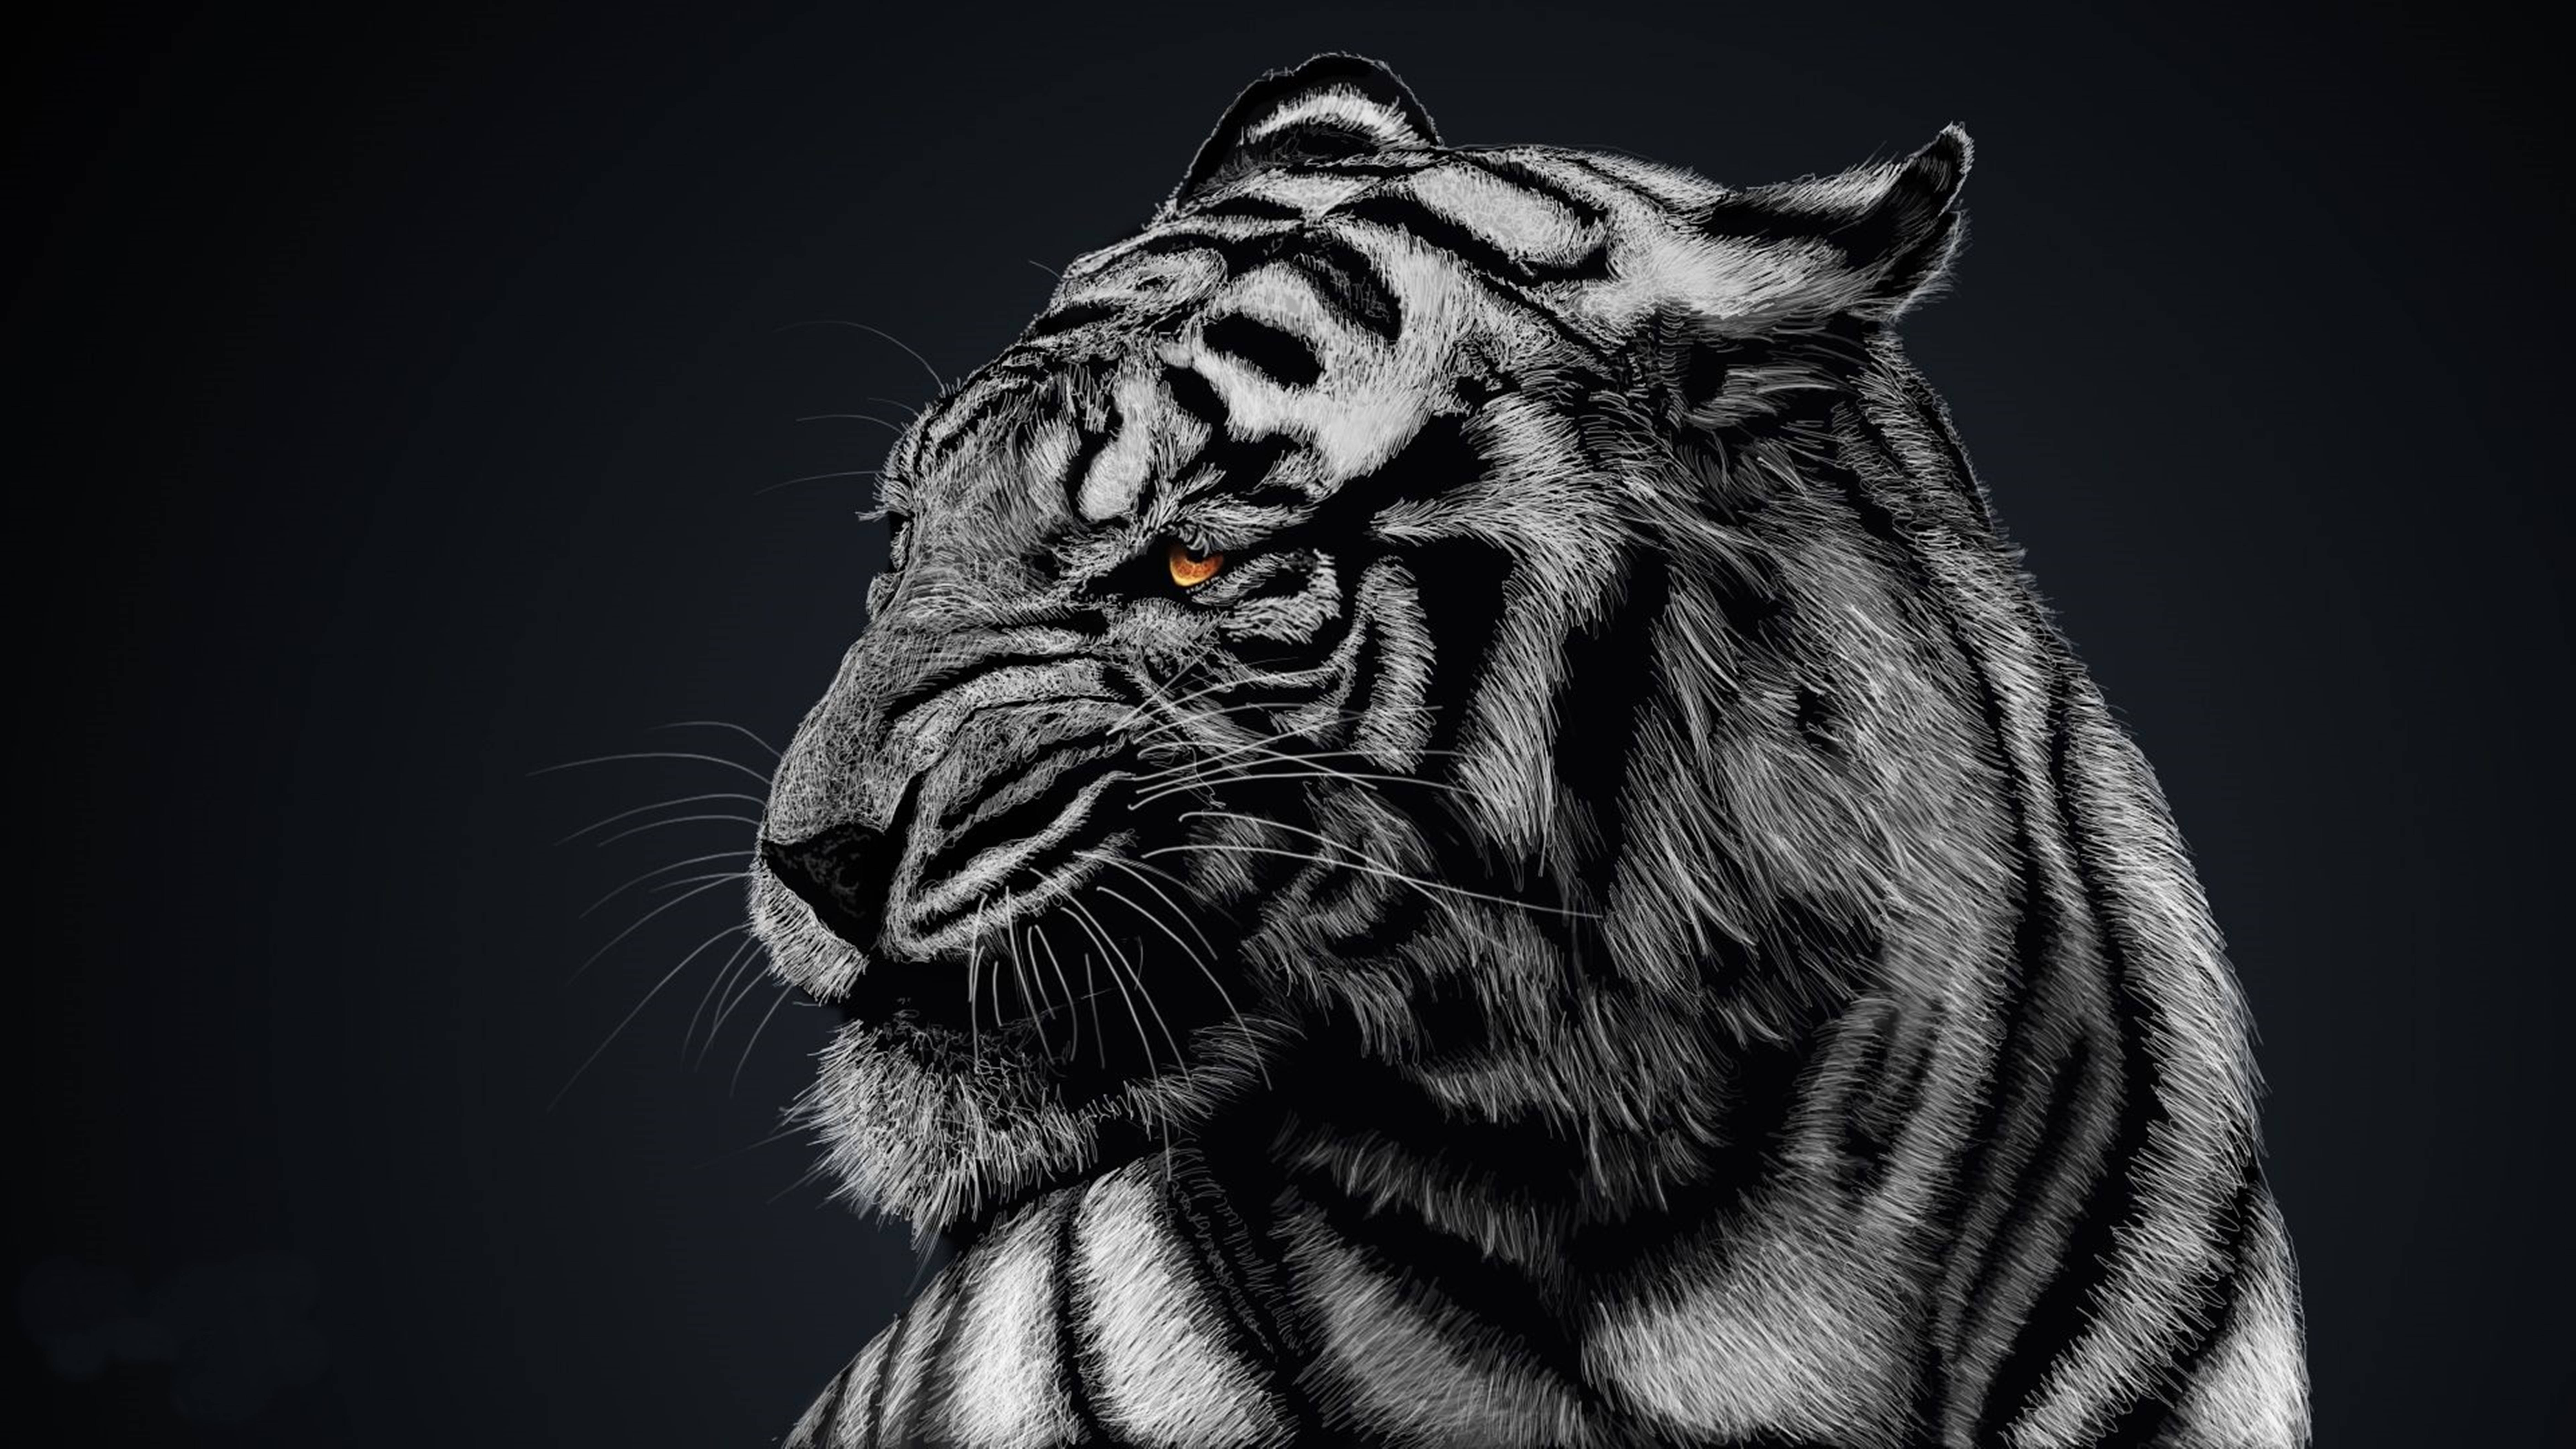 Majestic 8K Tiger in Ultra-High Definition Wallpaper